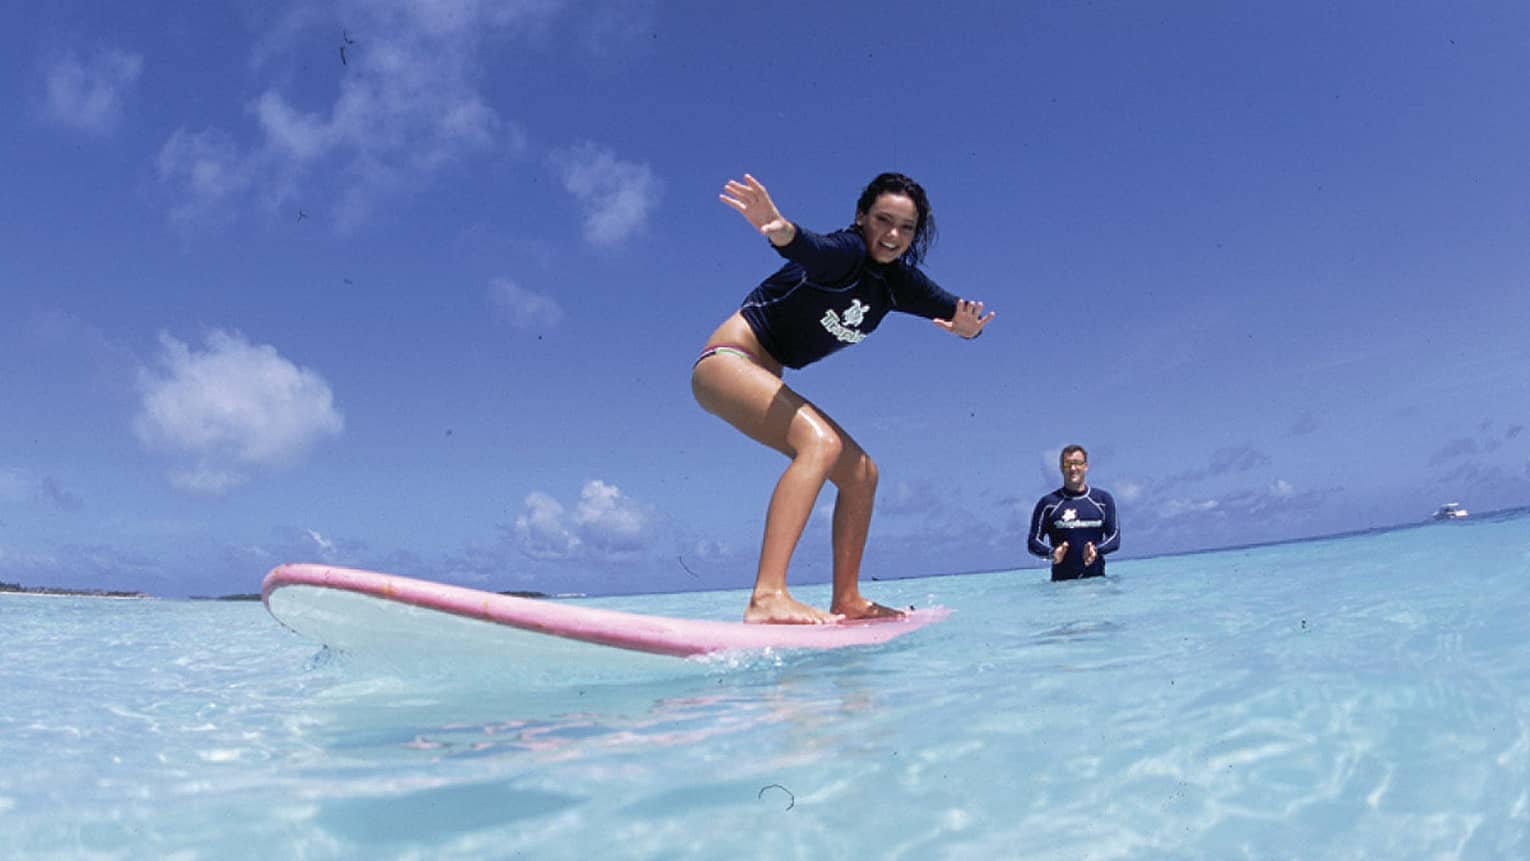 Woman rides pink surfboard on crystal clear water with man behind clapping